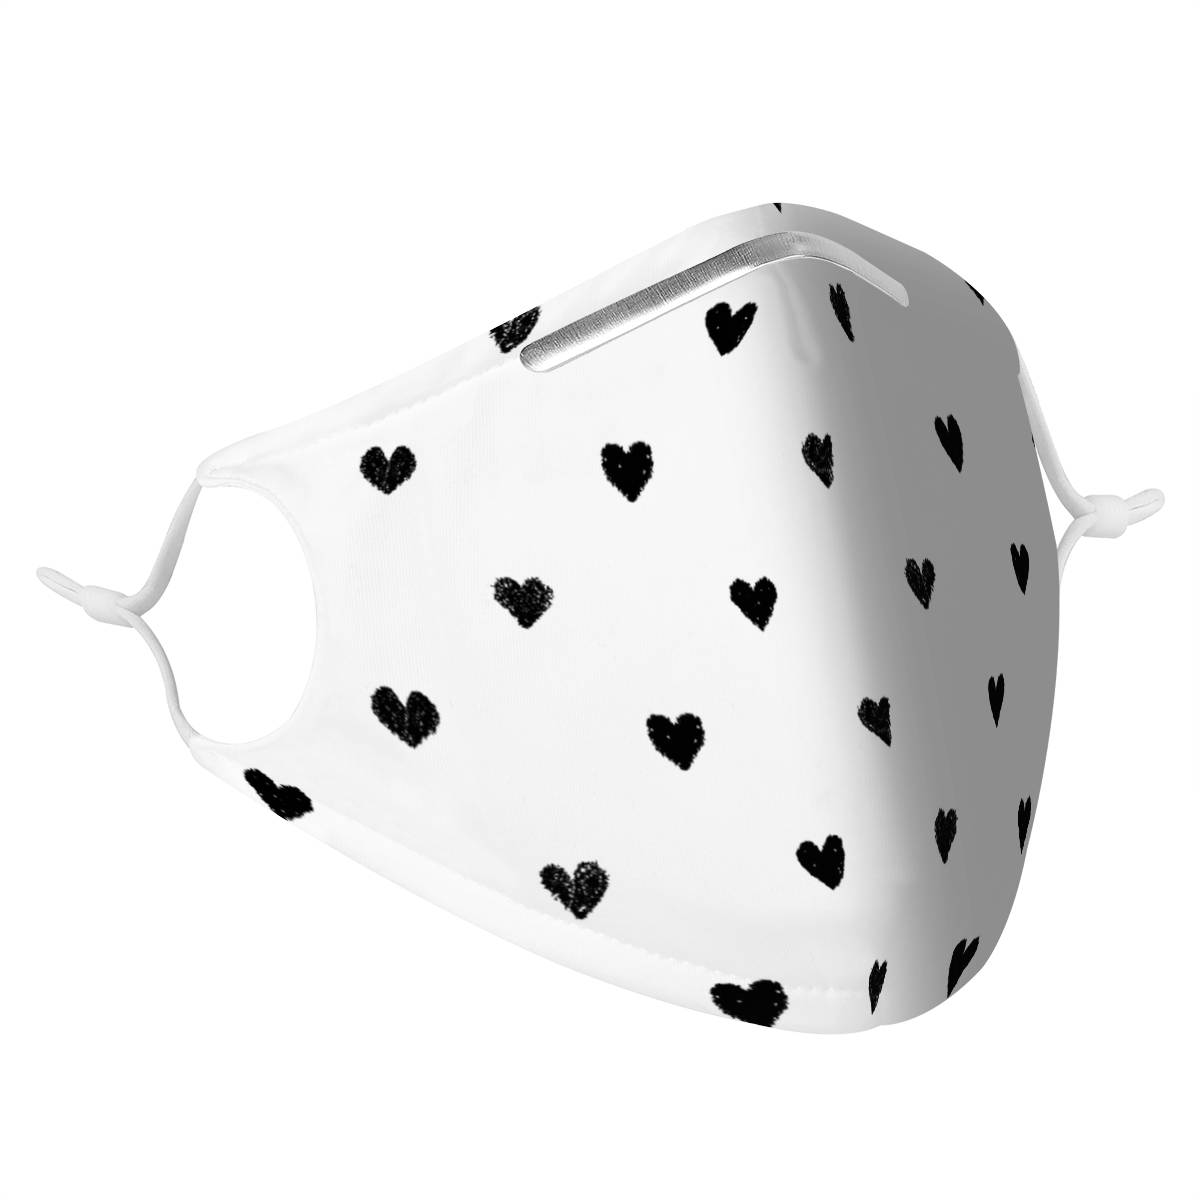 HEARTS - MASK WITH (4) PM 2.5 CARBON FILTERS